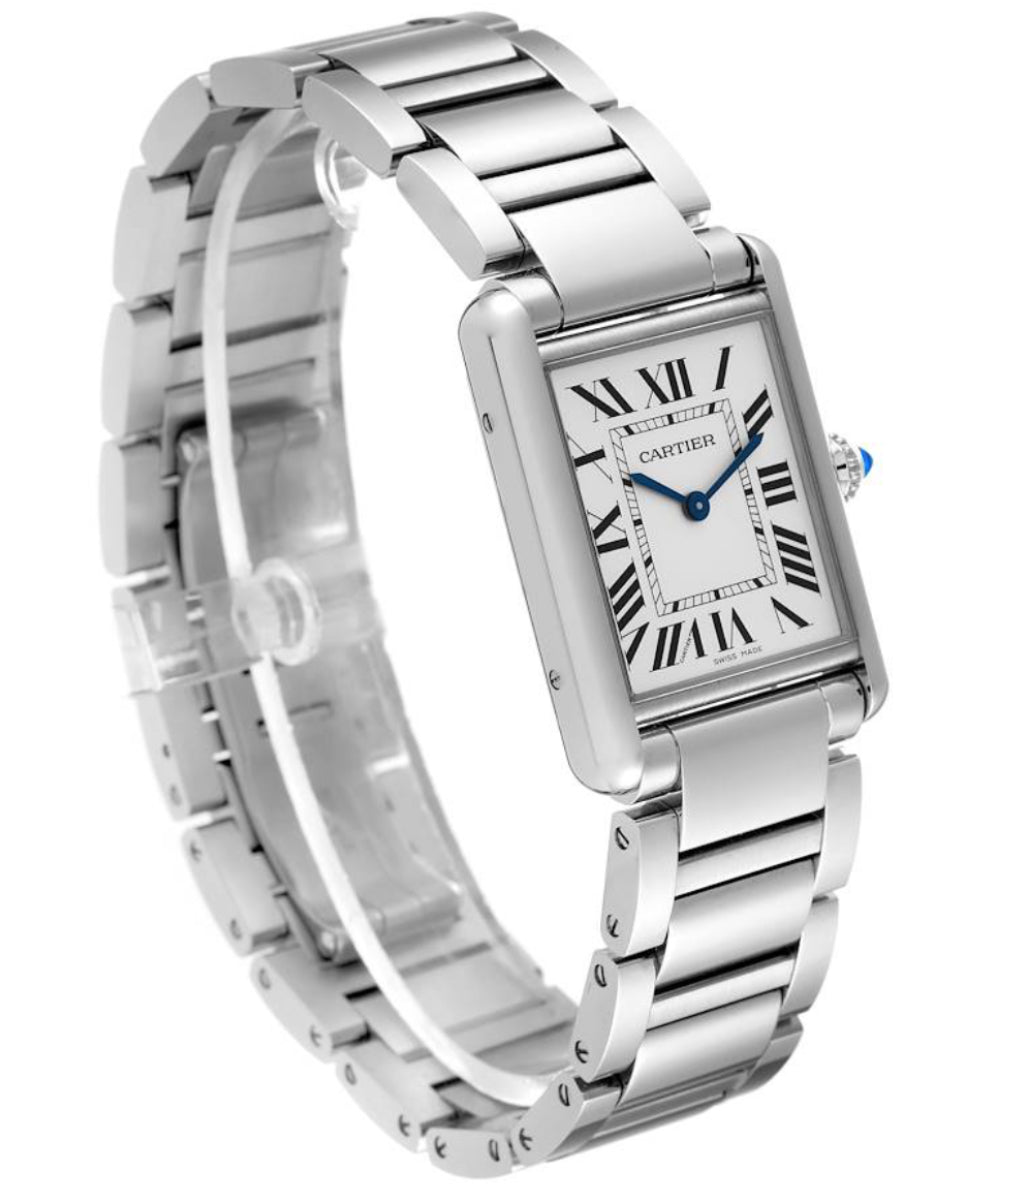 Cartier Tank Must Large, 33.7mm x 25.5mm, Stainless Steel Case, Silver Dial, Roman Numeral Hour Markers, Polished With Brushed Stainless Steel Bezel Women’s Watch. Model # WSTA0052